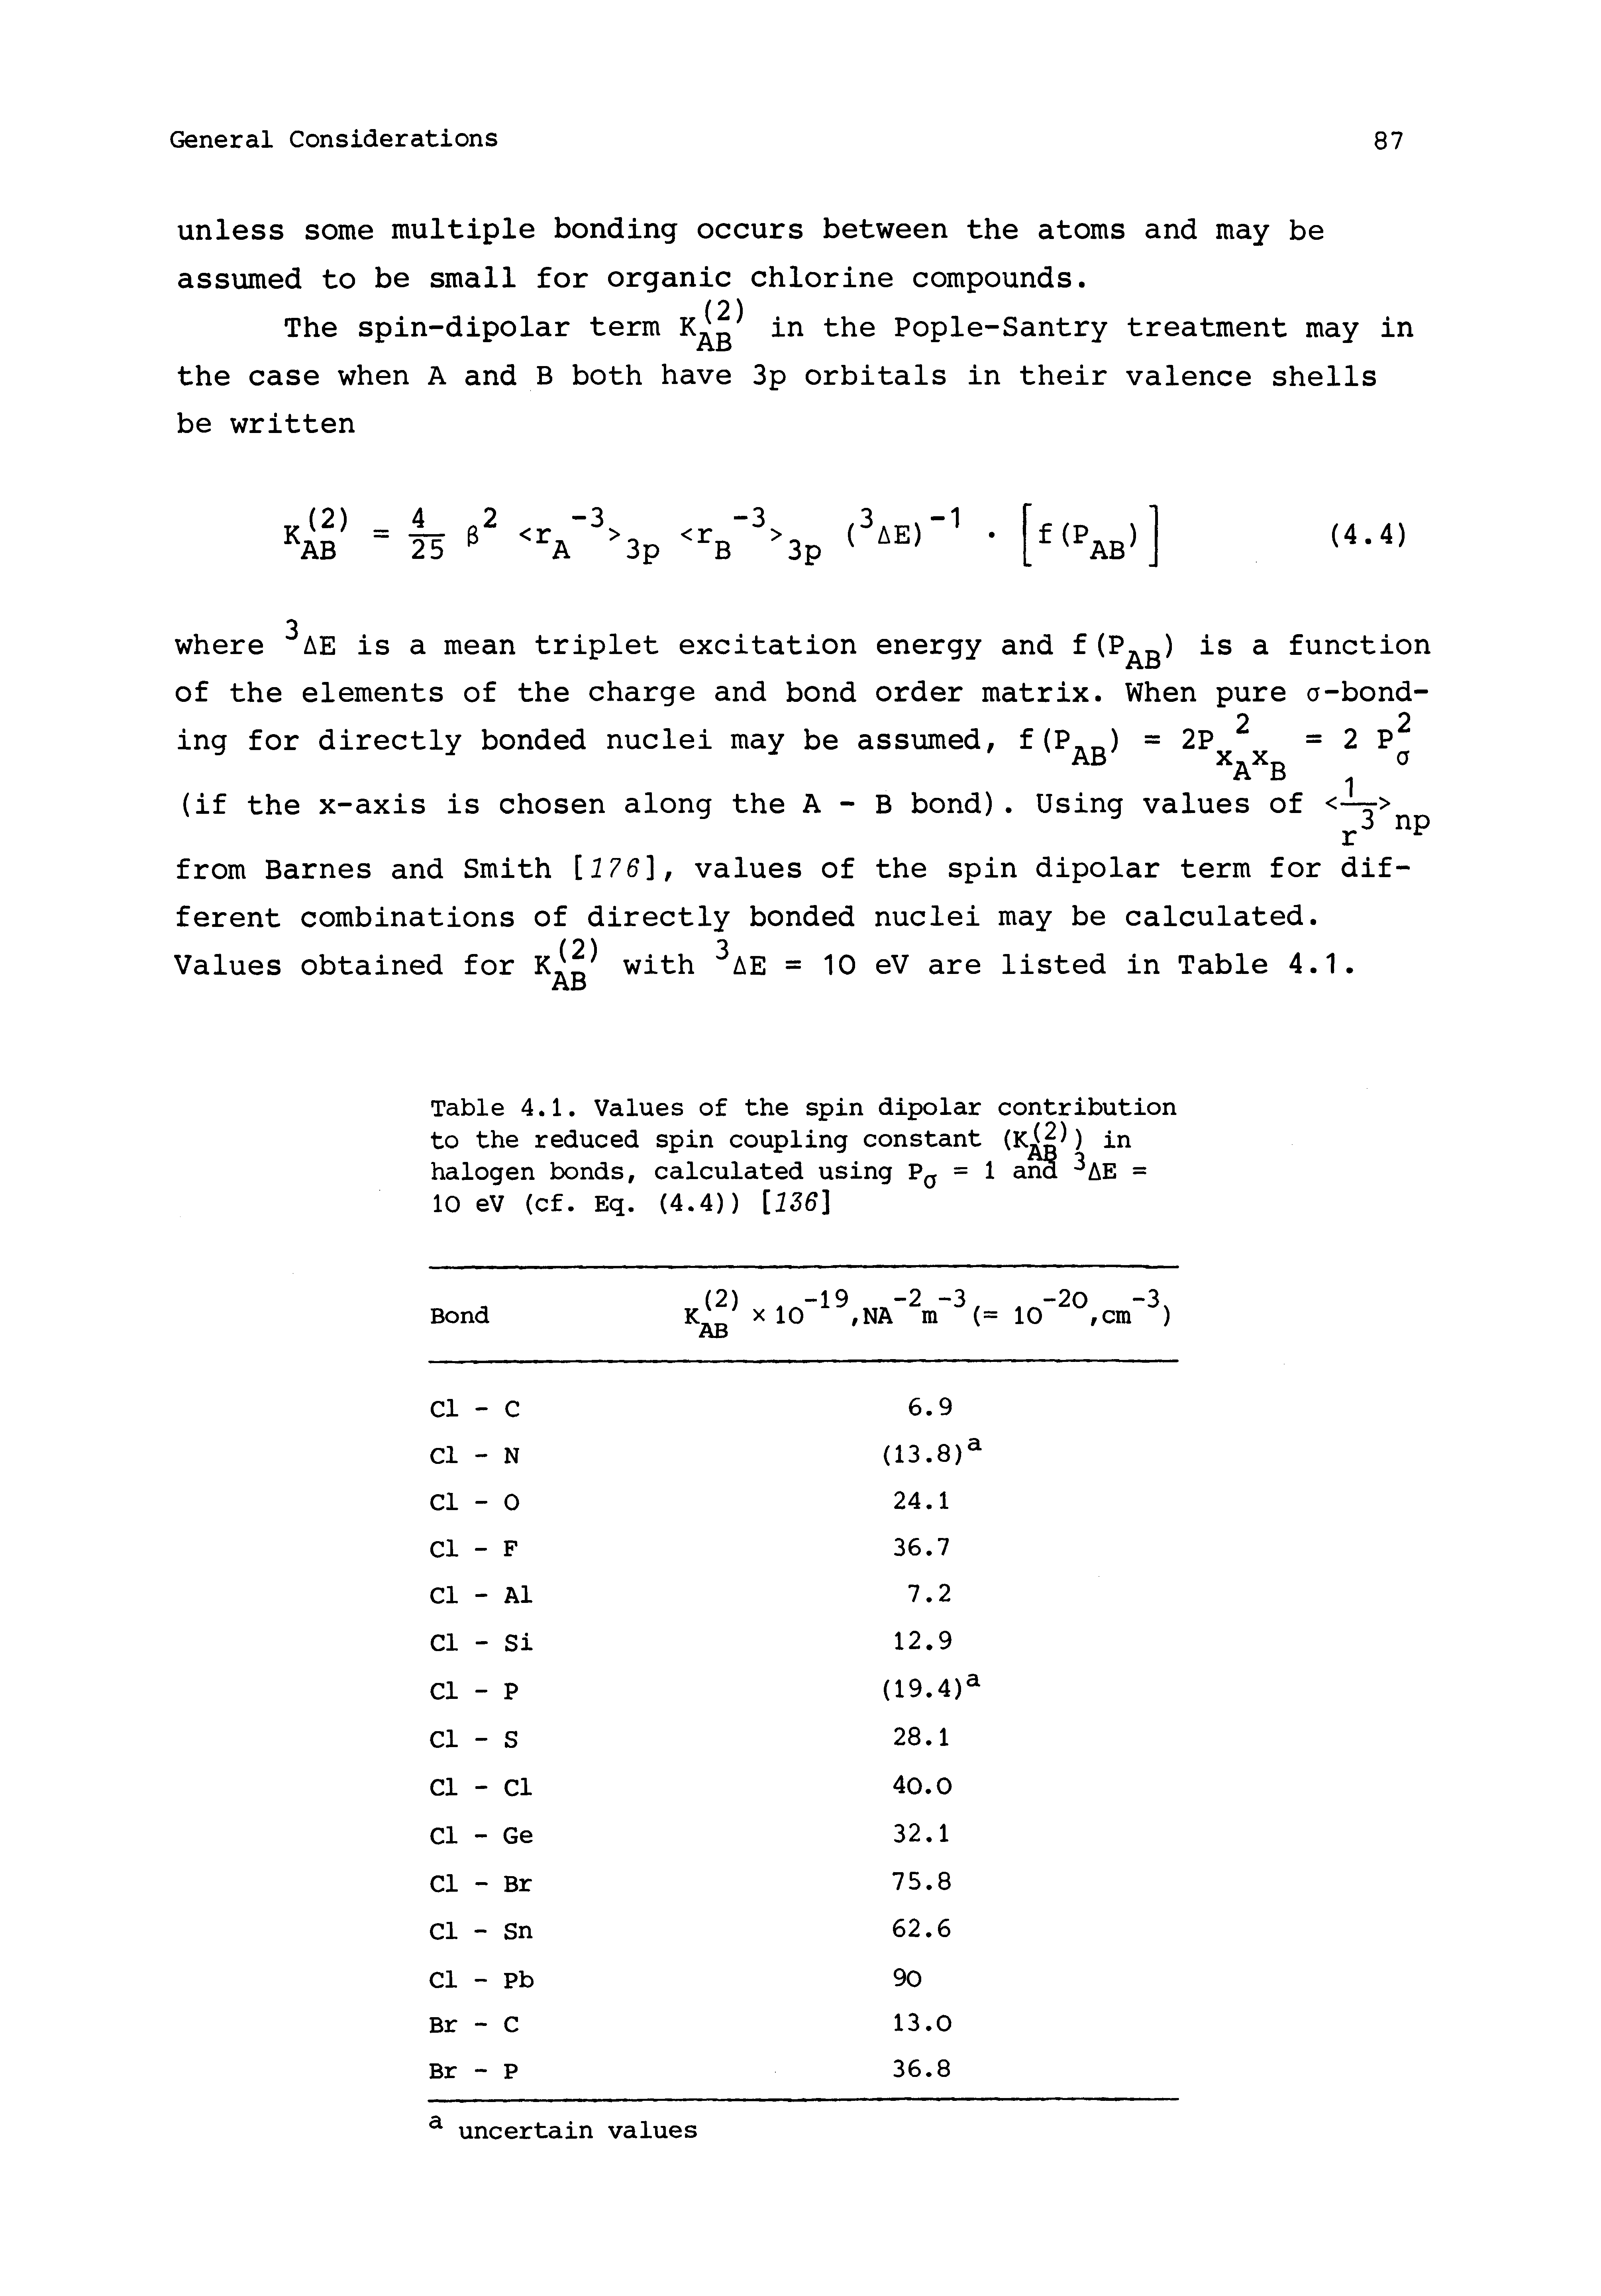 Table 4.1. Values of the spin dipolar contribution to the reduced spin coupling constant (k( )) in halogen bonds, calculated using = 1 and AE =...